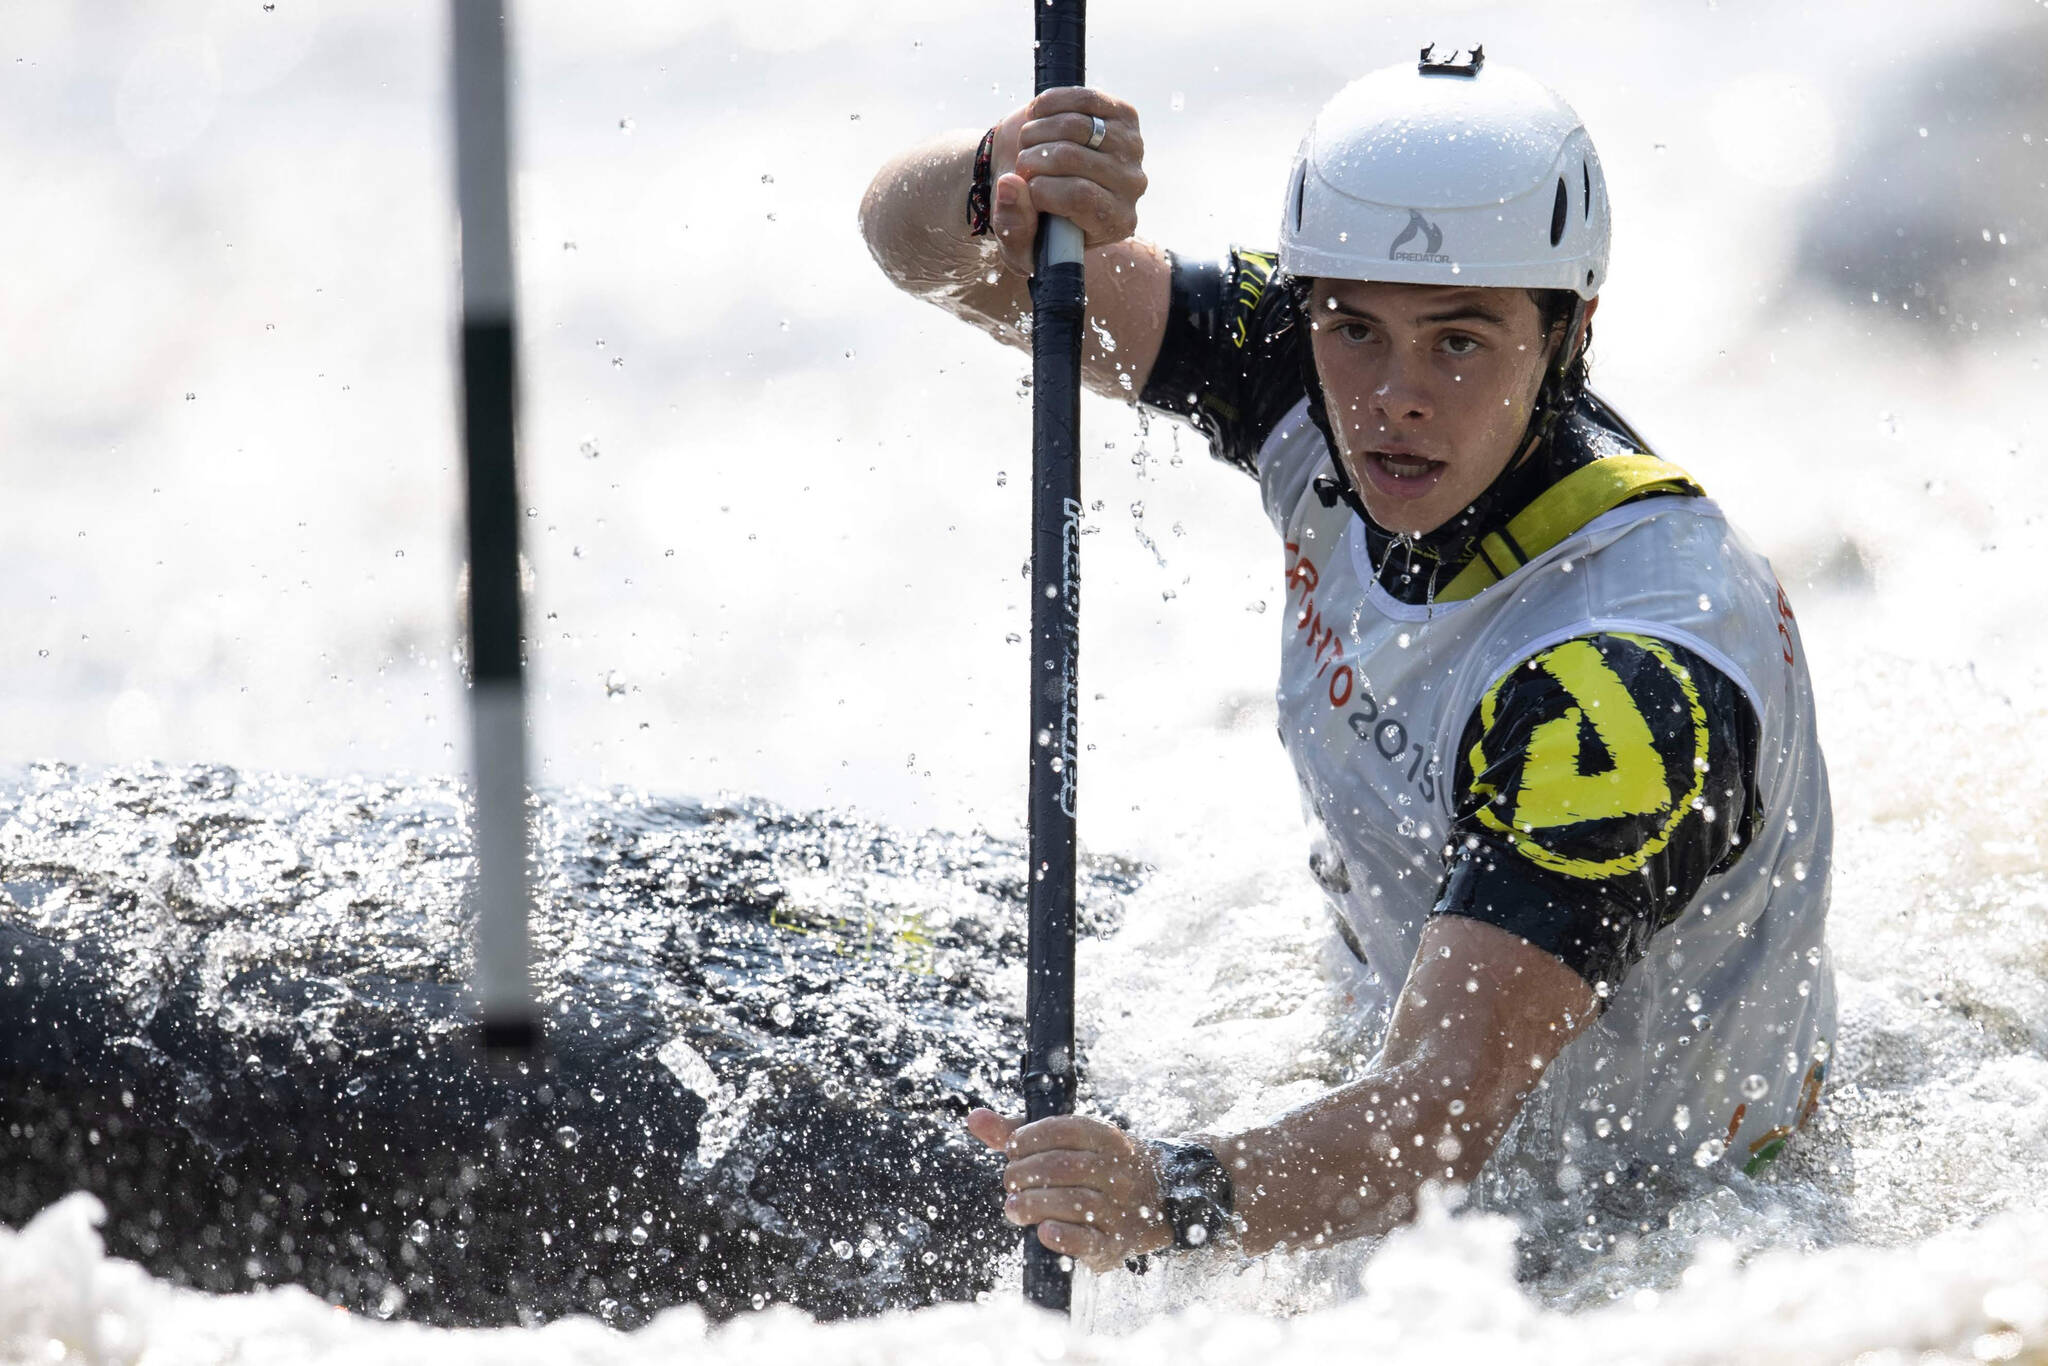 Chilliwack’s Nathan Christensen racing at the 2021 Canoe Kayak Canada Slalom Team Trials held at “The Pumphouse” Whitewater Course in Ottawa. (Sean Burges/Mundo Sport Images)